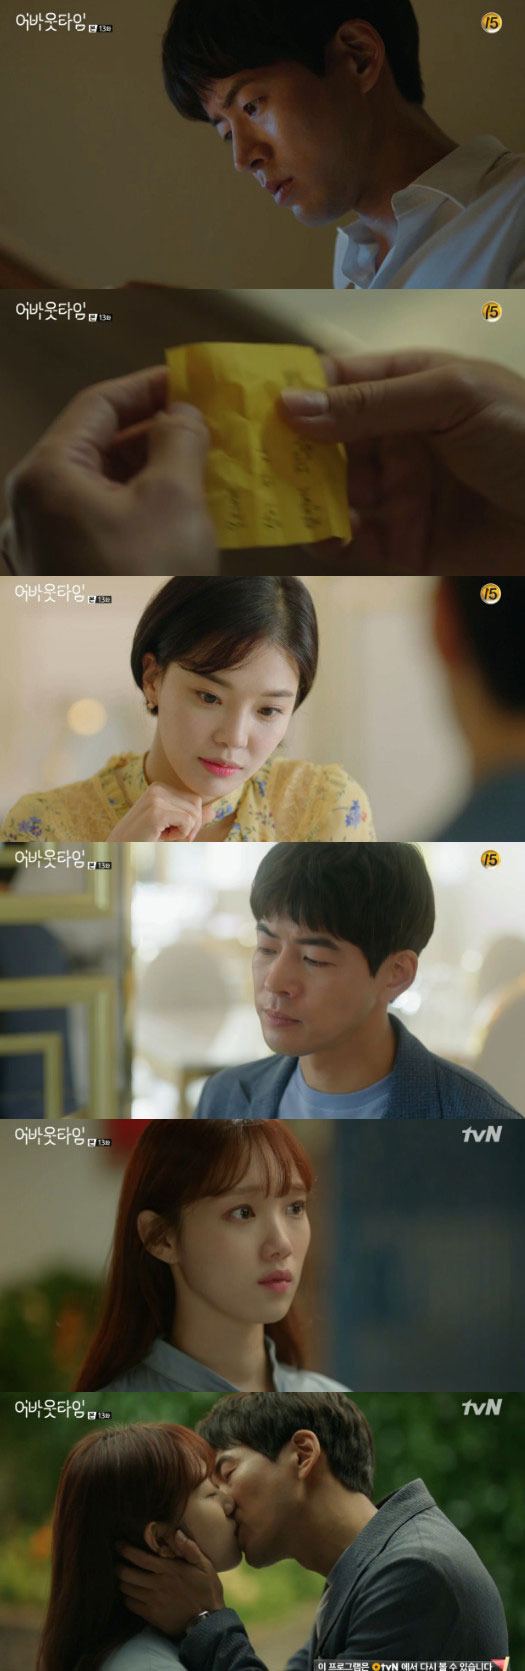 Seoul = = Lee Sang-yoon revealed his love with a kiss after learning why Lee Sung-kyung left.On the 2nd, TVNs monthly drama About Time, Mika and Doha confirmed their love with a kiss.Mika thinks Doha is taking his life away from him and has parted ways with him.Oh, woman Confessions that he also sees a life clock for such Mika.Oh, woman said, Mika. Are you afraid? Your eyes are full of love, but youre trying to break up.Is that because hes afraid hell be taken away from you and killed?She said, Did you think you could only see it? She said she also saw a life clock.Oh, woman, who knew that the man she loved in the past was taking away her life, and she ran away from him in fear, Confessions her past wounds.Doha, meanwhile, saw a note written by Mika in the doll and found out that she did not leave because she hated her.The note read, Im sorry, I love you, even though I know that this is the only time Ive been allowed.Doha doubted why Mika had parted ways with him.I met Mikas friend Sung-hee (Han Seung-yeon), but she only said that everything Mika did was for Doha.In such circumstances, Su Bong (Im Se-mi) pressed her marriage to Doha, who told Su Bong, Cancel the meeting, I told you not to be with you.But Su-bong said, I told you Id break it, and you cant die for a marriage with me.I will not give up on myself, he said.On this day, Doha tried to find out why Mika had parted ways with him; eventually he asked Mika if he and Mika were together, and he was in trouble with him.Eventually Mika confided in the fact that he was reducing his lifespan because of himself, and Doha revealed his love with a kiss.